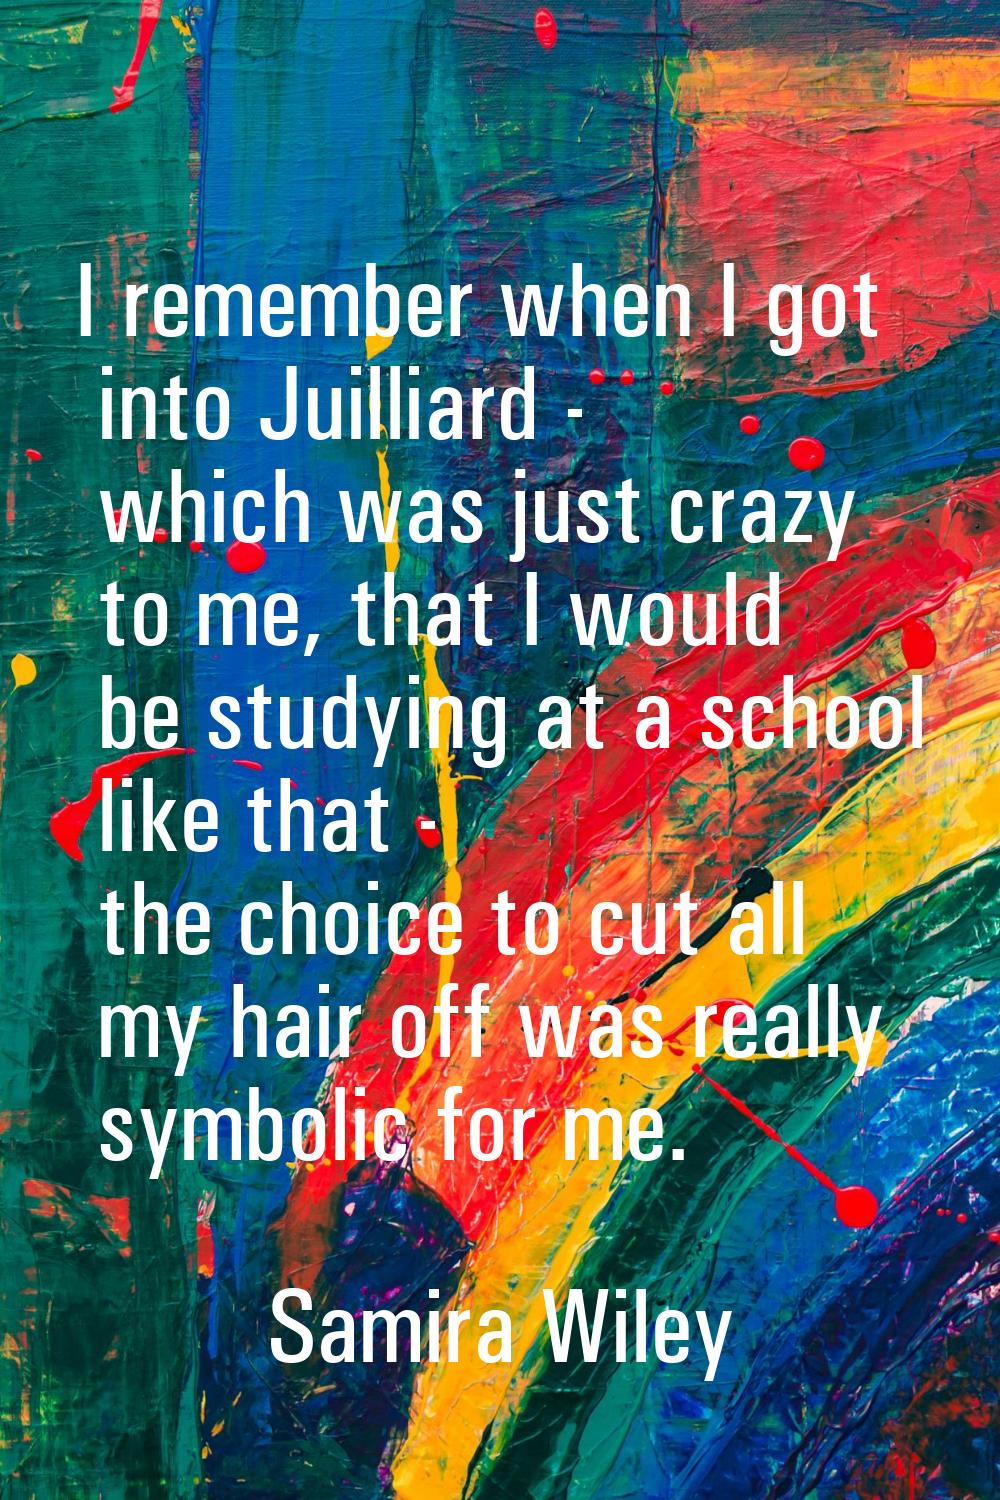 I remember when I got into Juilliard - which was just crazy to me, that I would be studying at a sc